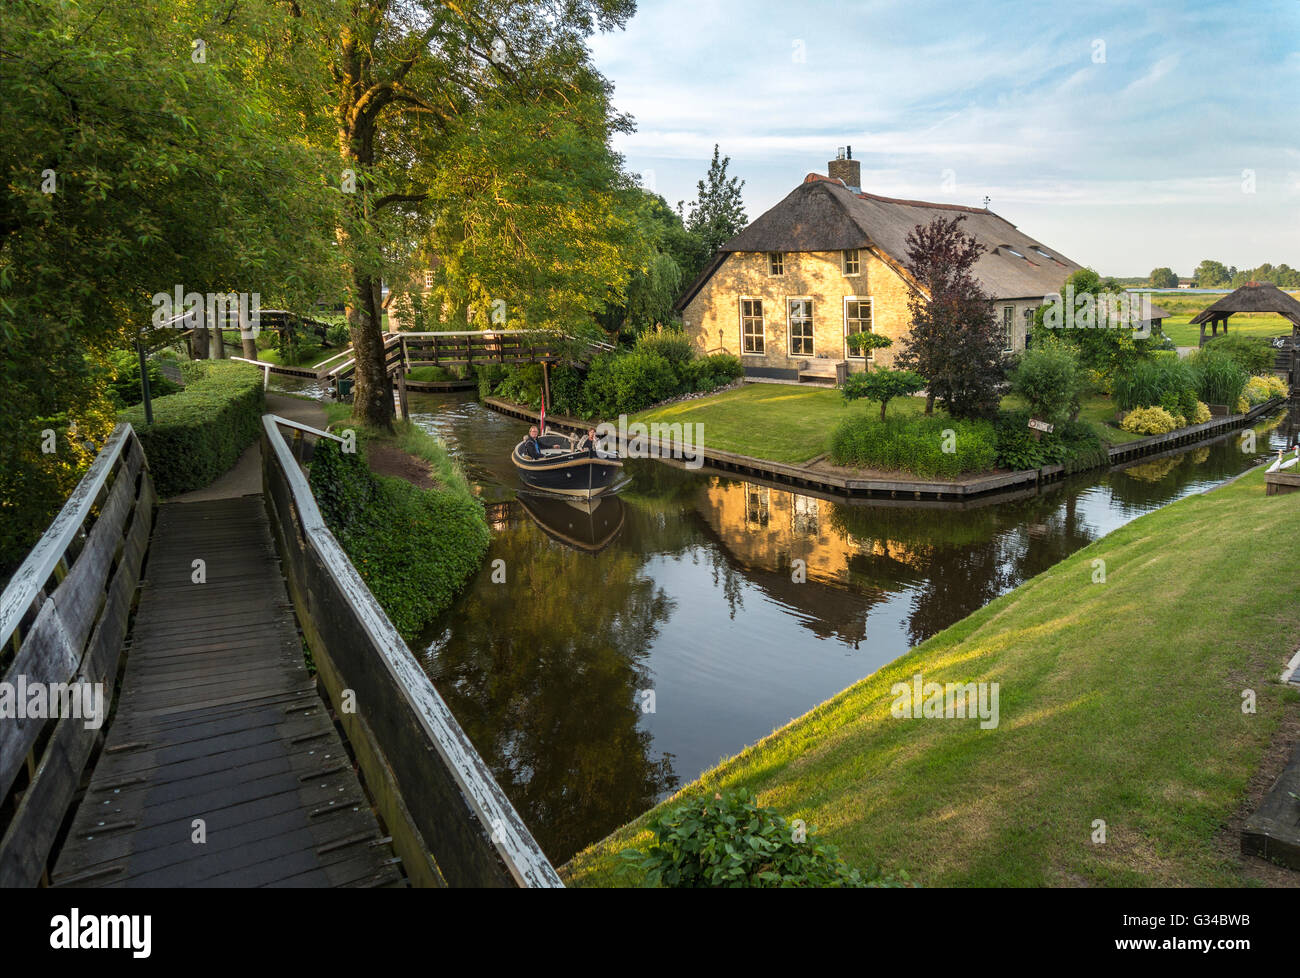 Giethoorn, Netherlands. Boat in the Dorpsgracht or Village Canal with converted farmhouse on island with private bridge. Stock Photo